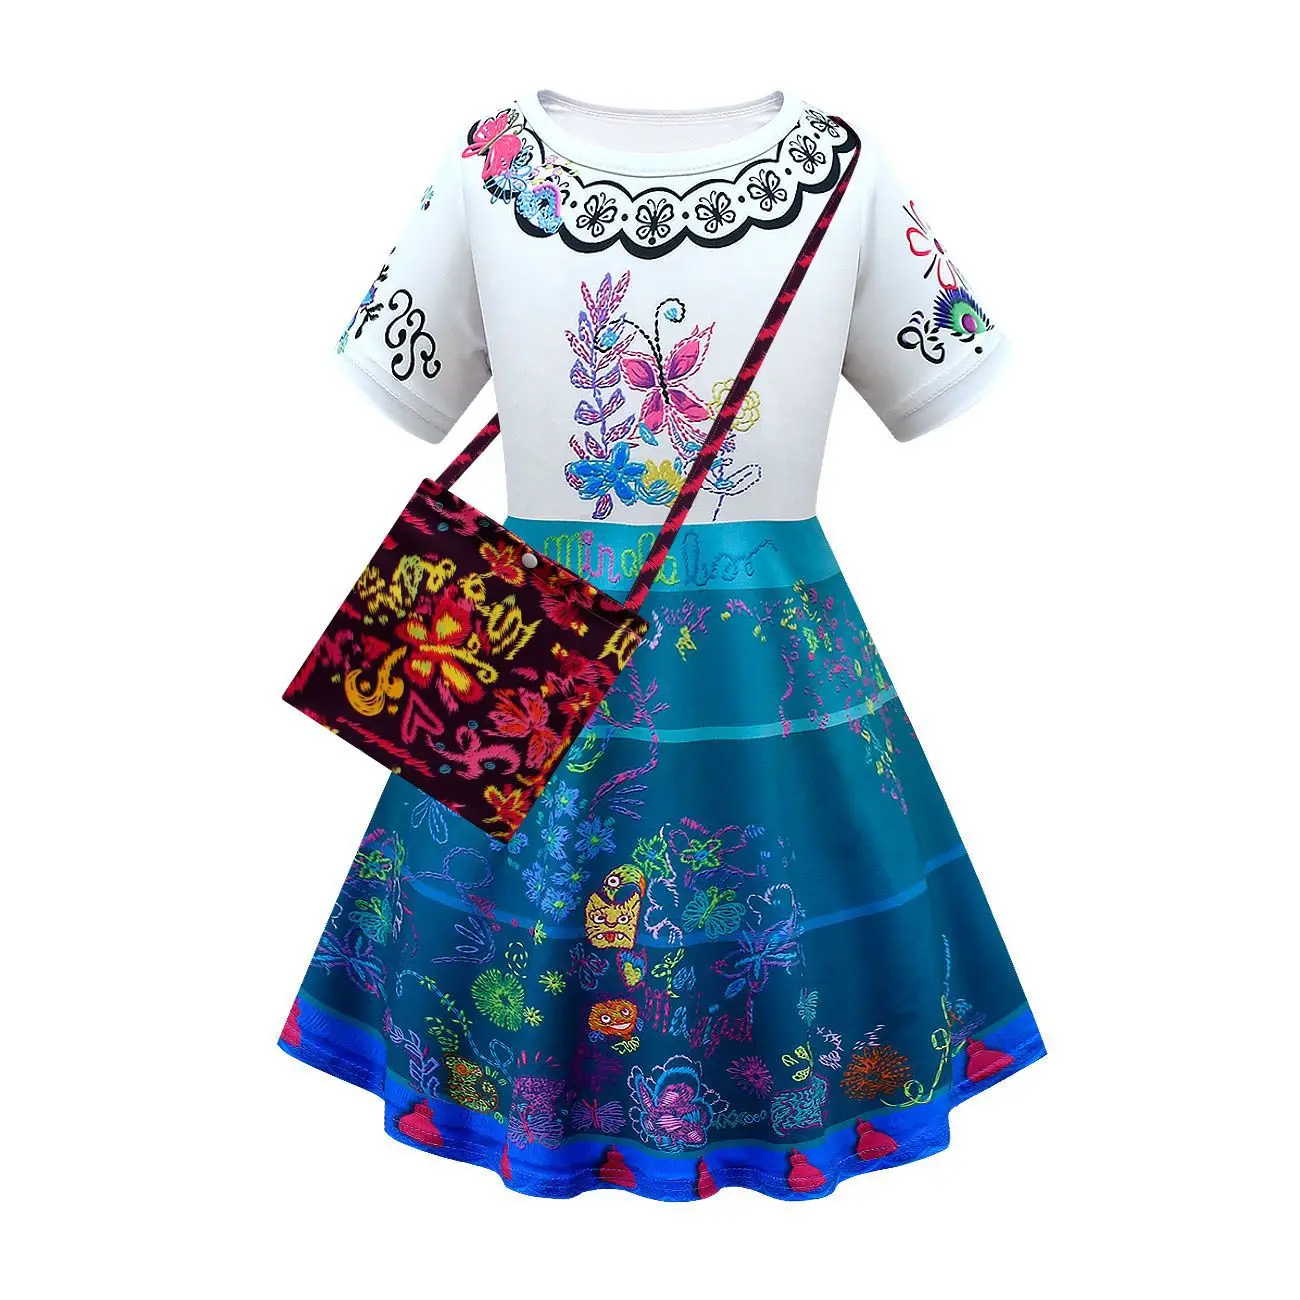 New Encanto Dress Mirabel Cosplay Princess Dresses Baby Girls Short Sleeve Cartoon Clothing Children Party Birthday Outfits baby girl skirt apparel